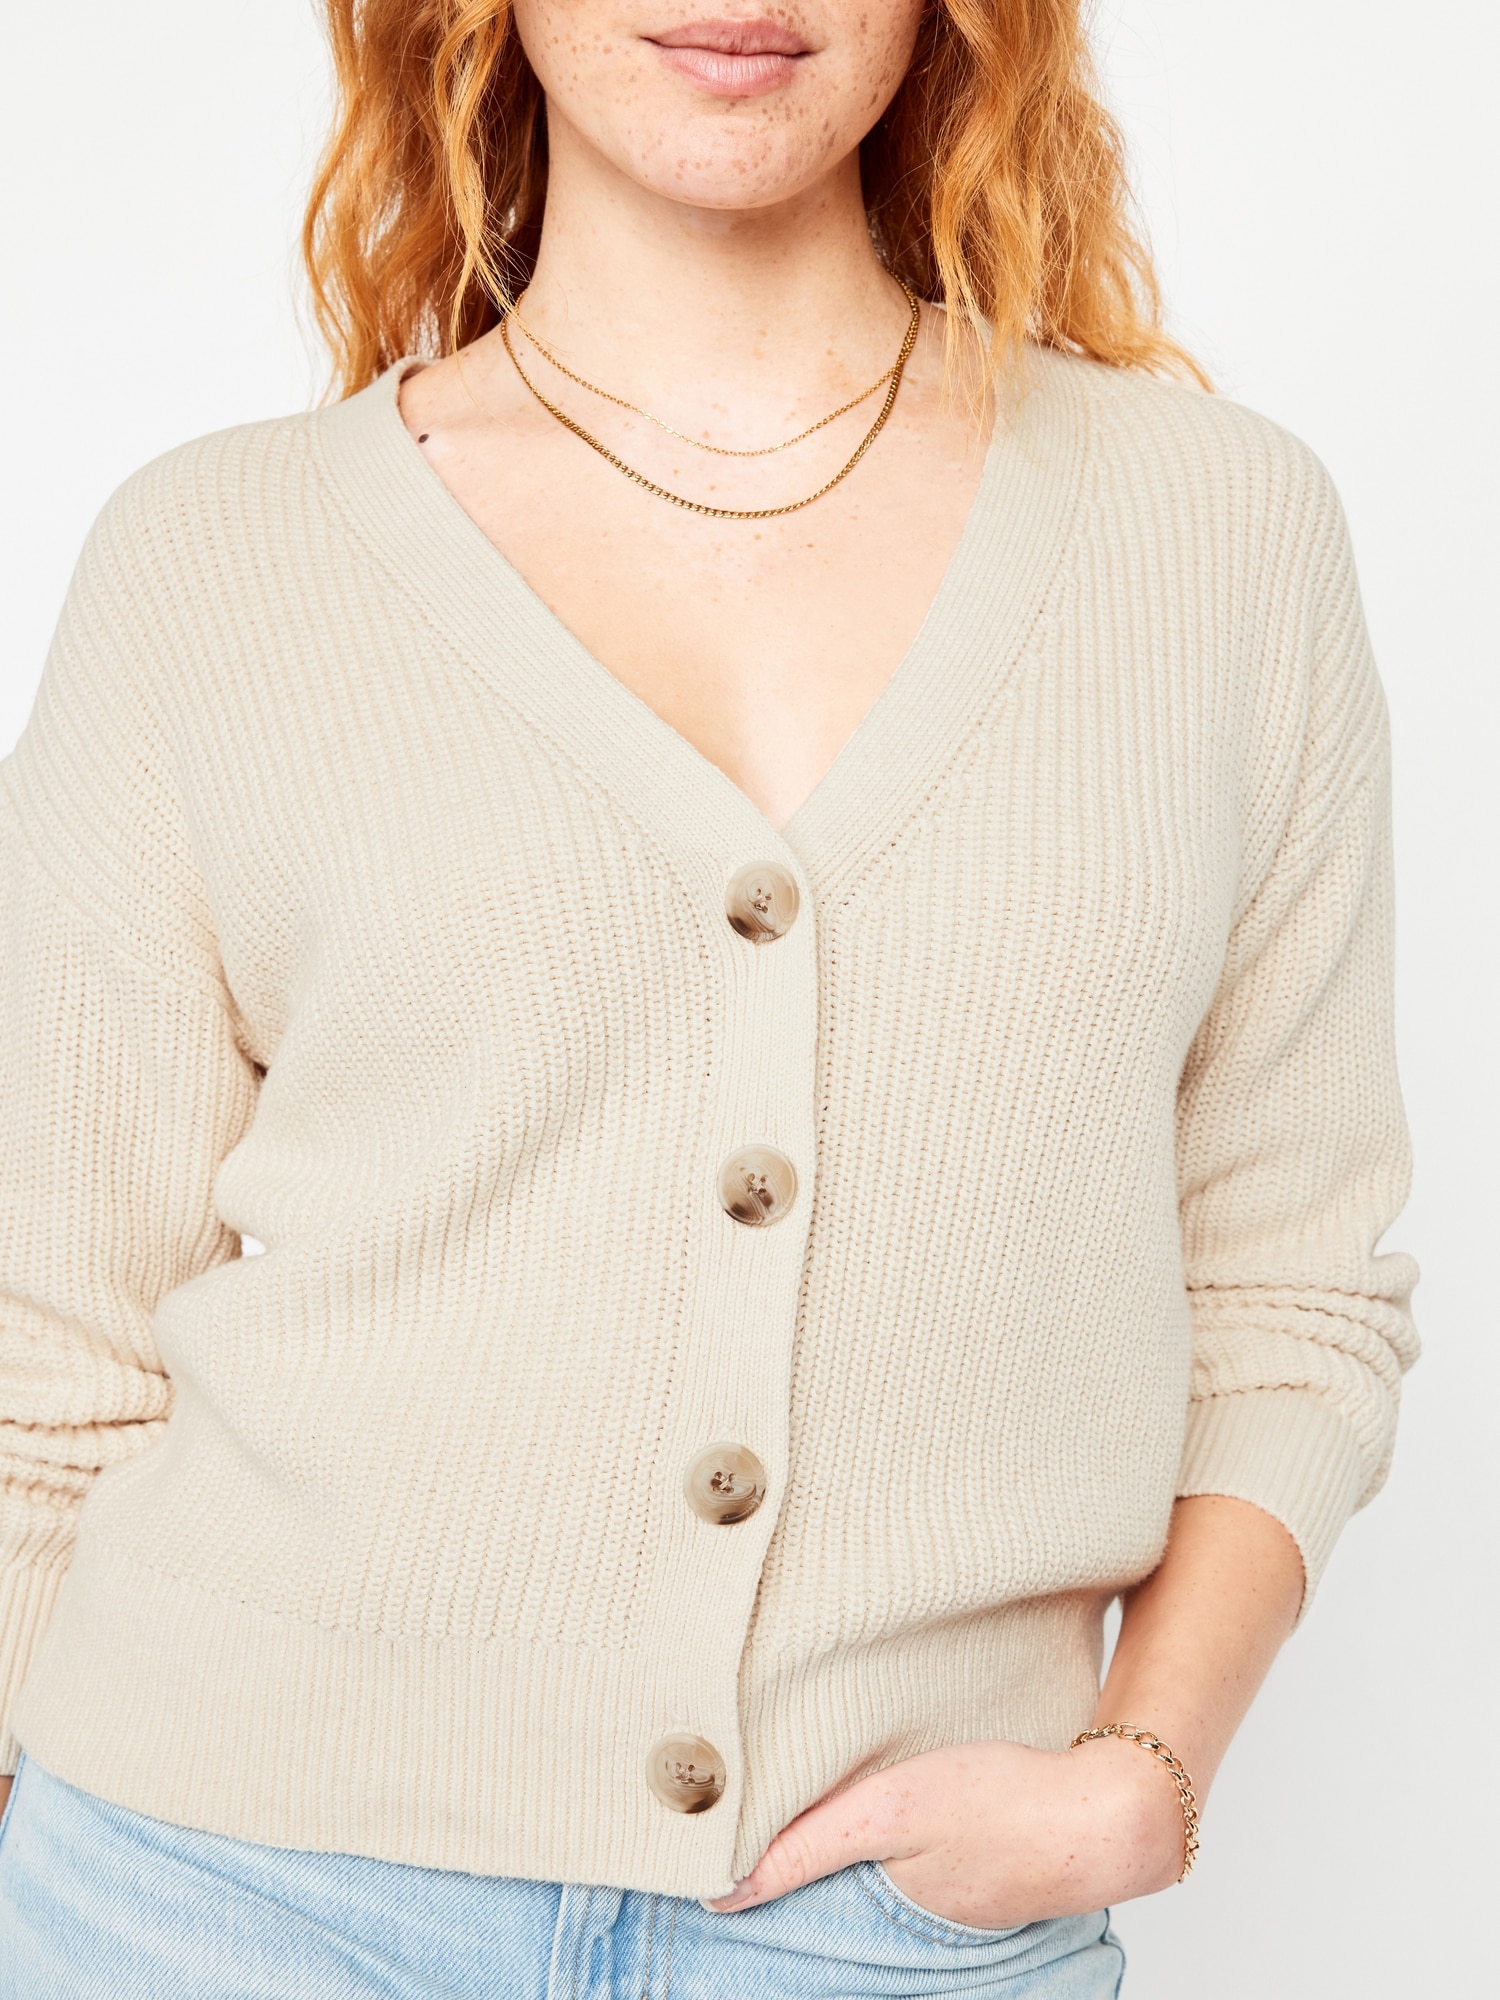 Classic Cardigan Sweater | Old Navy